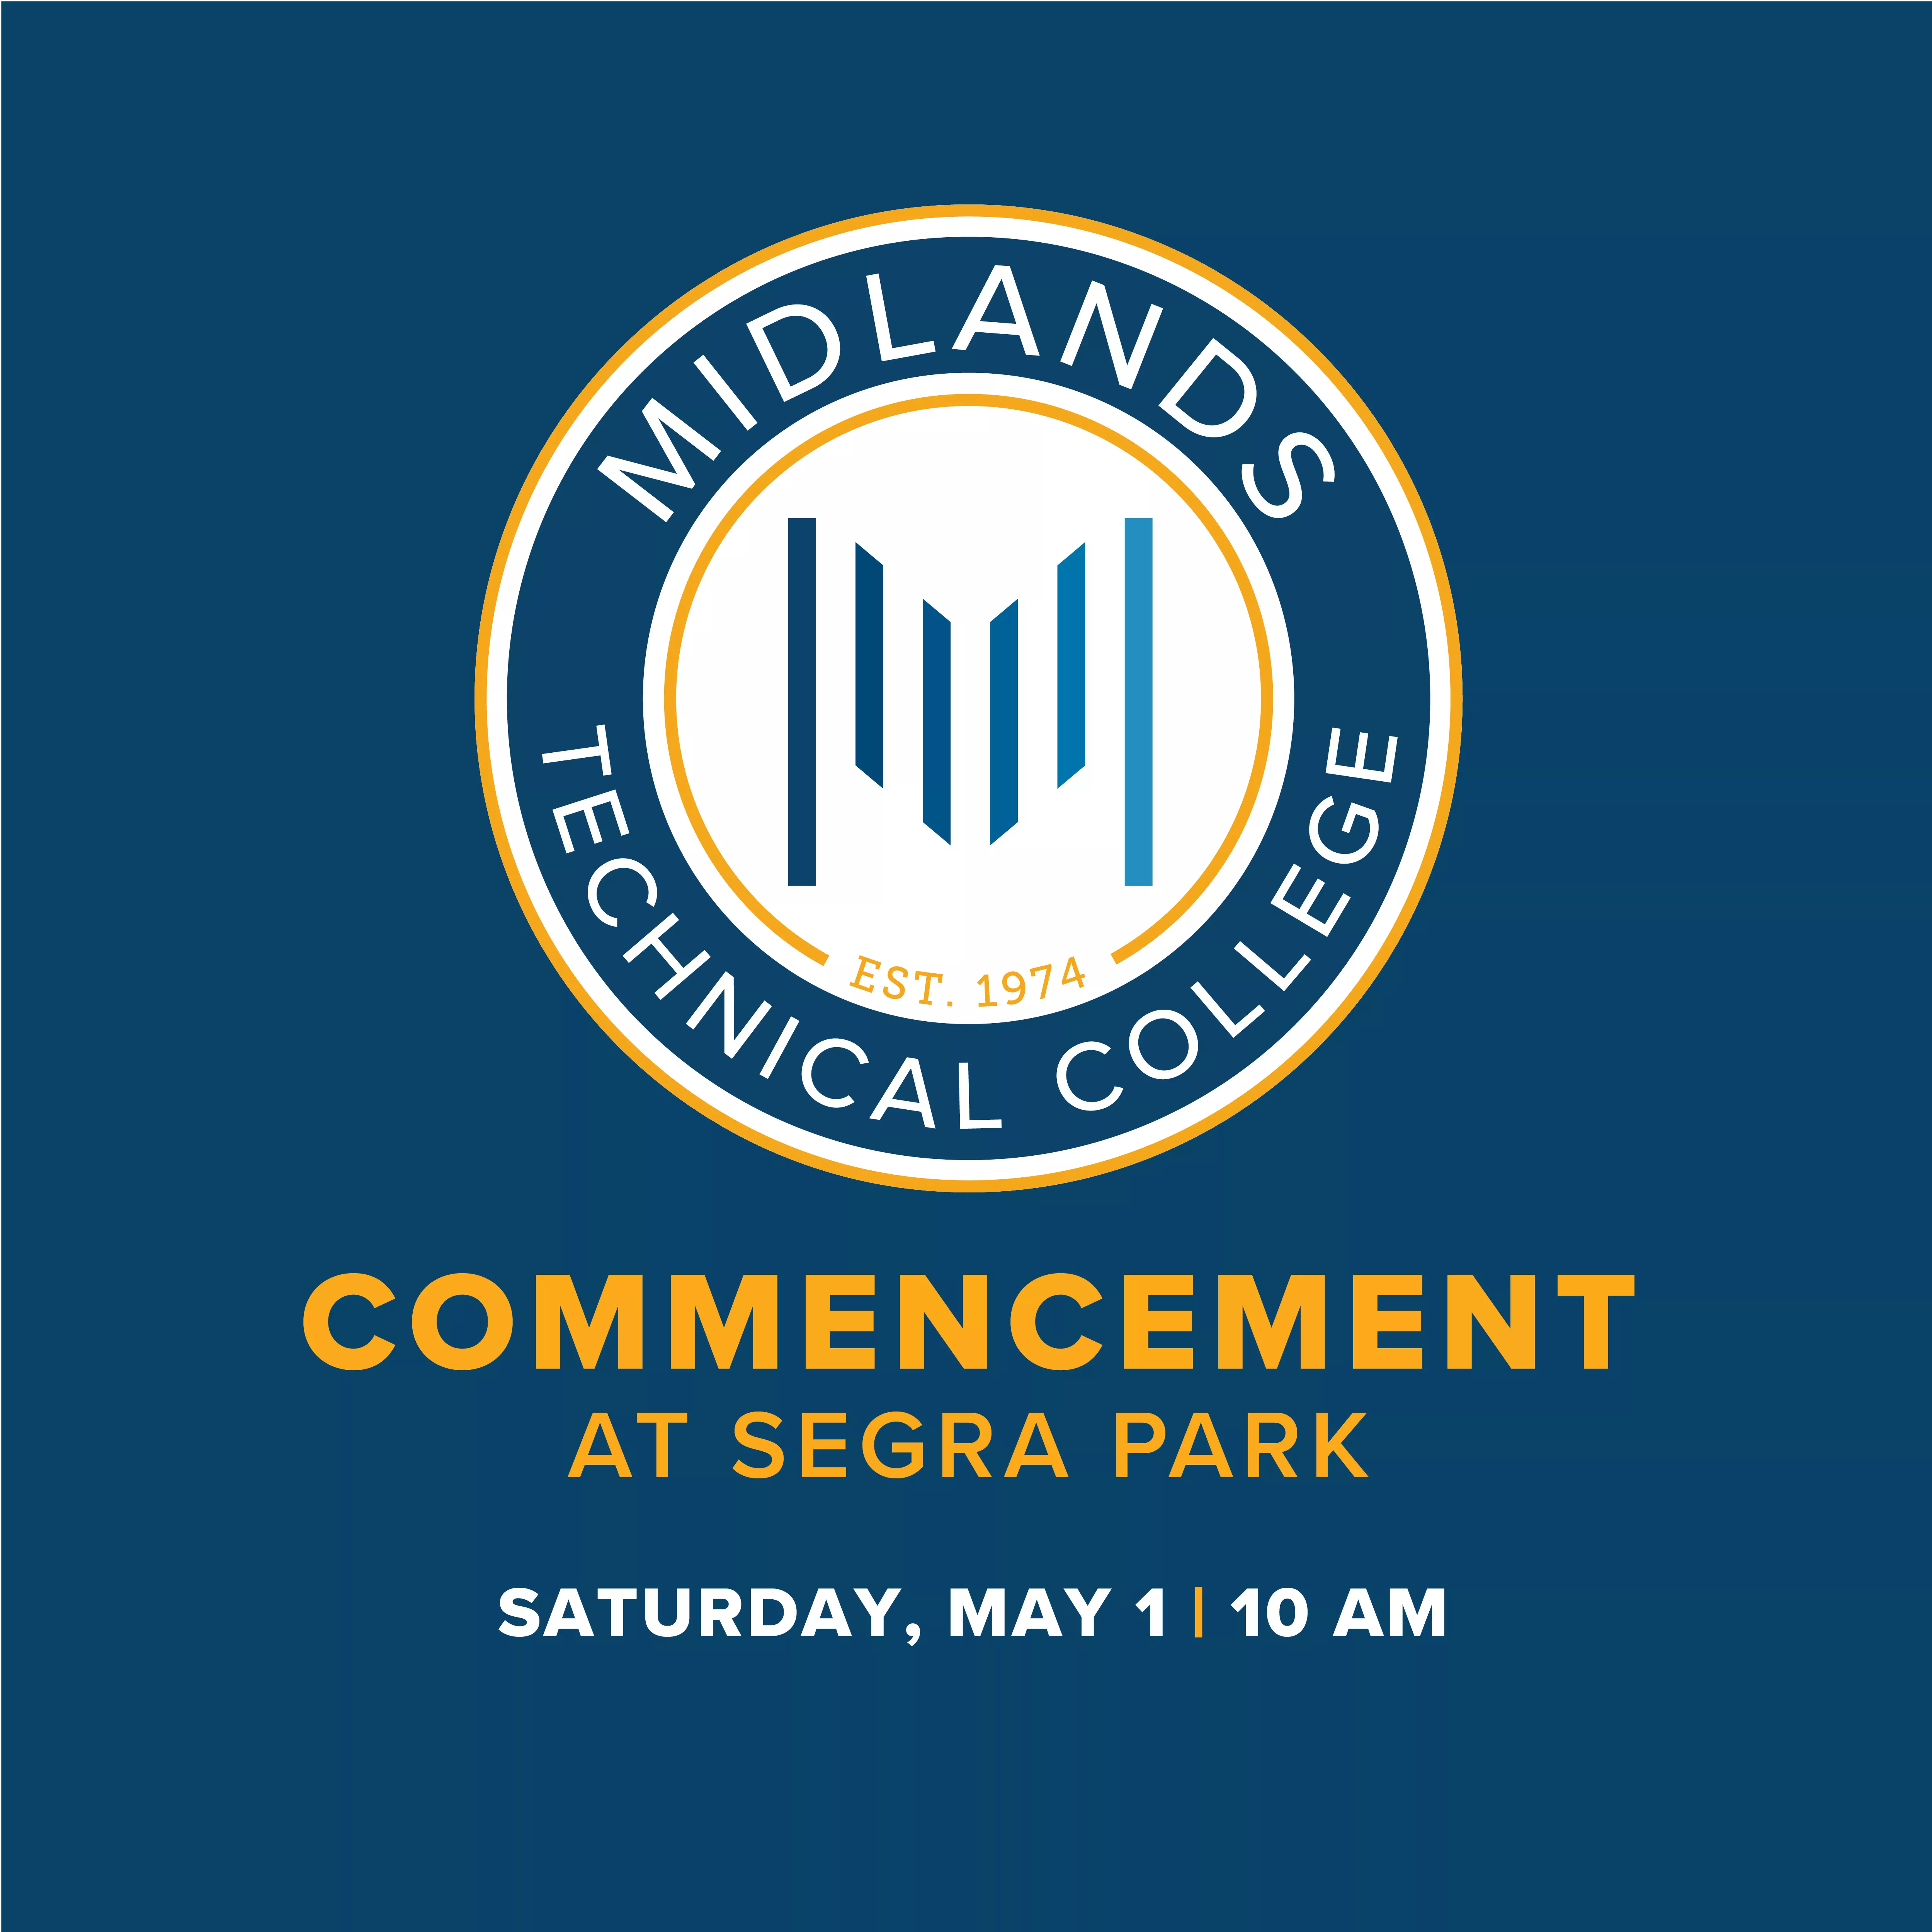 Midlands Technical College will host its 2021 Commencement Ceremony at Segra Park in Columbia on May 1st at 10:00 a.m.